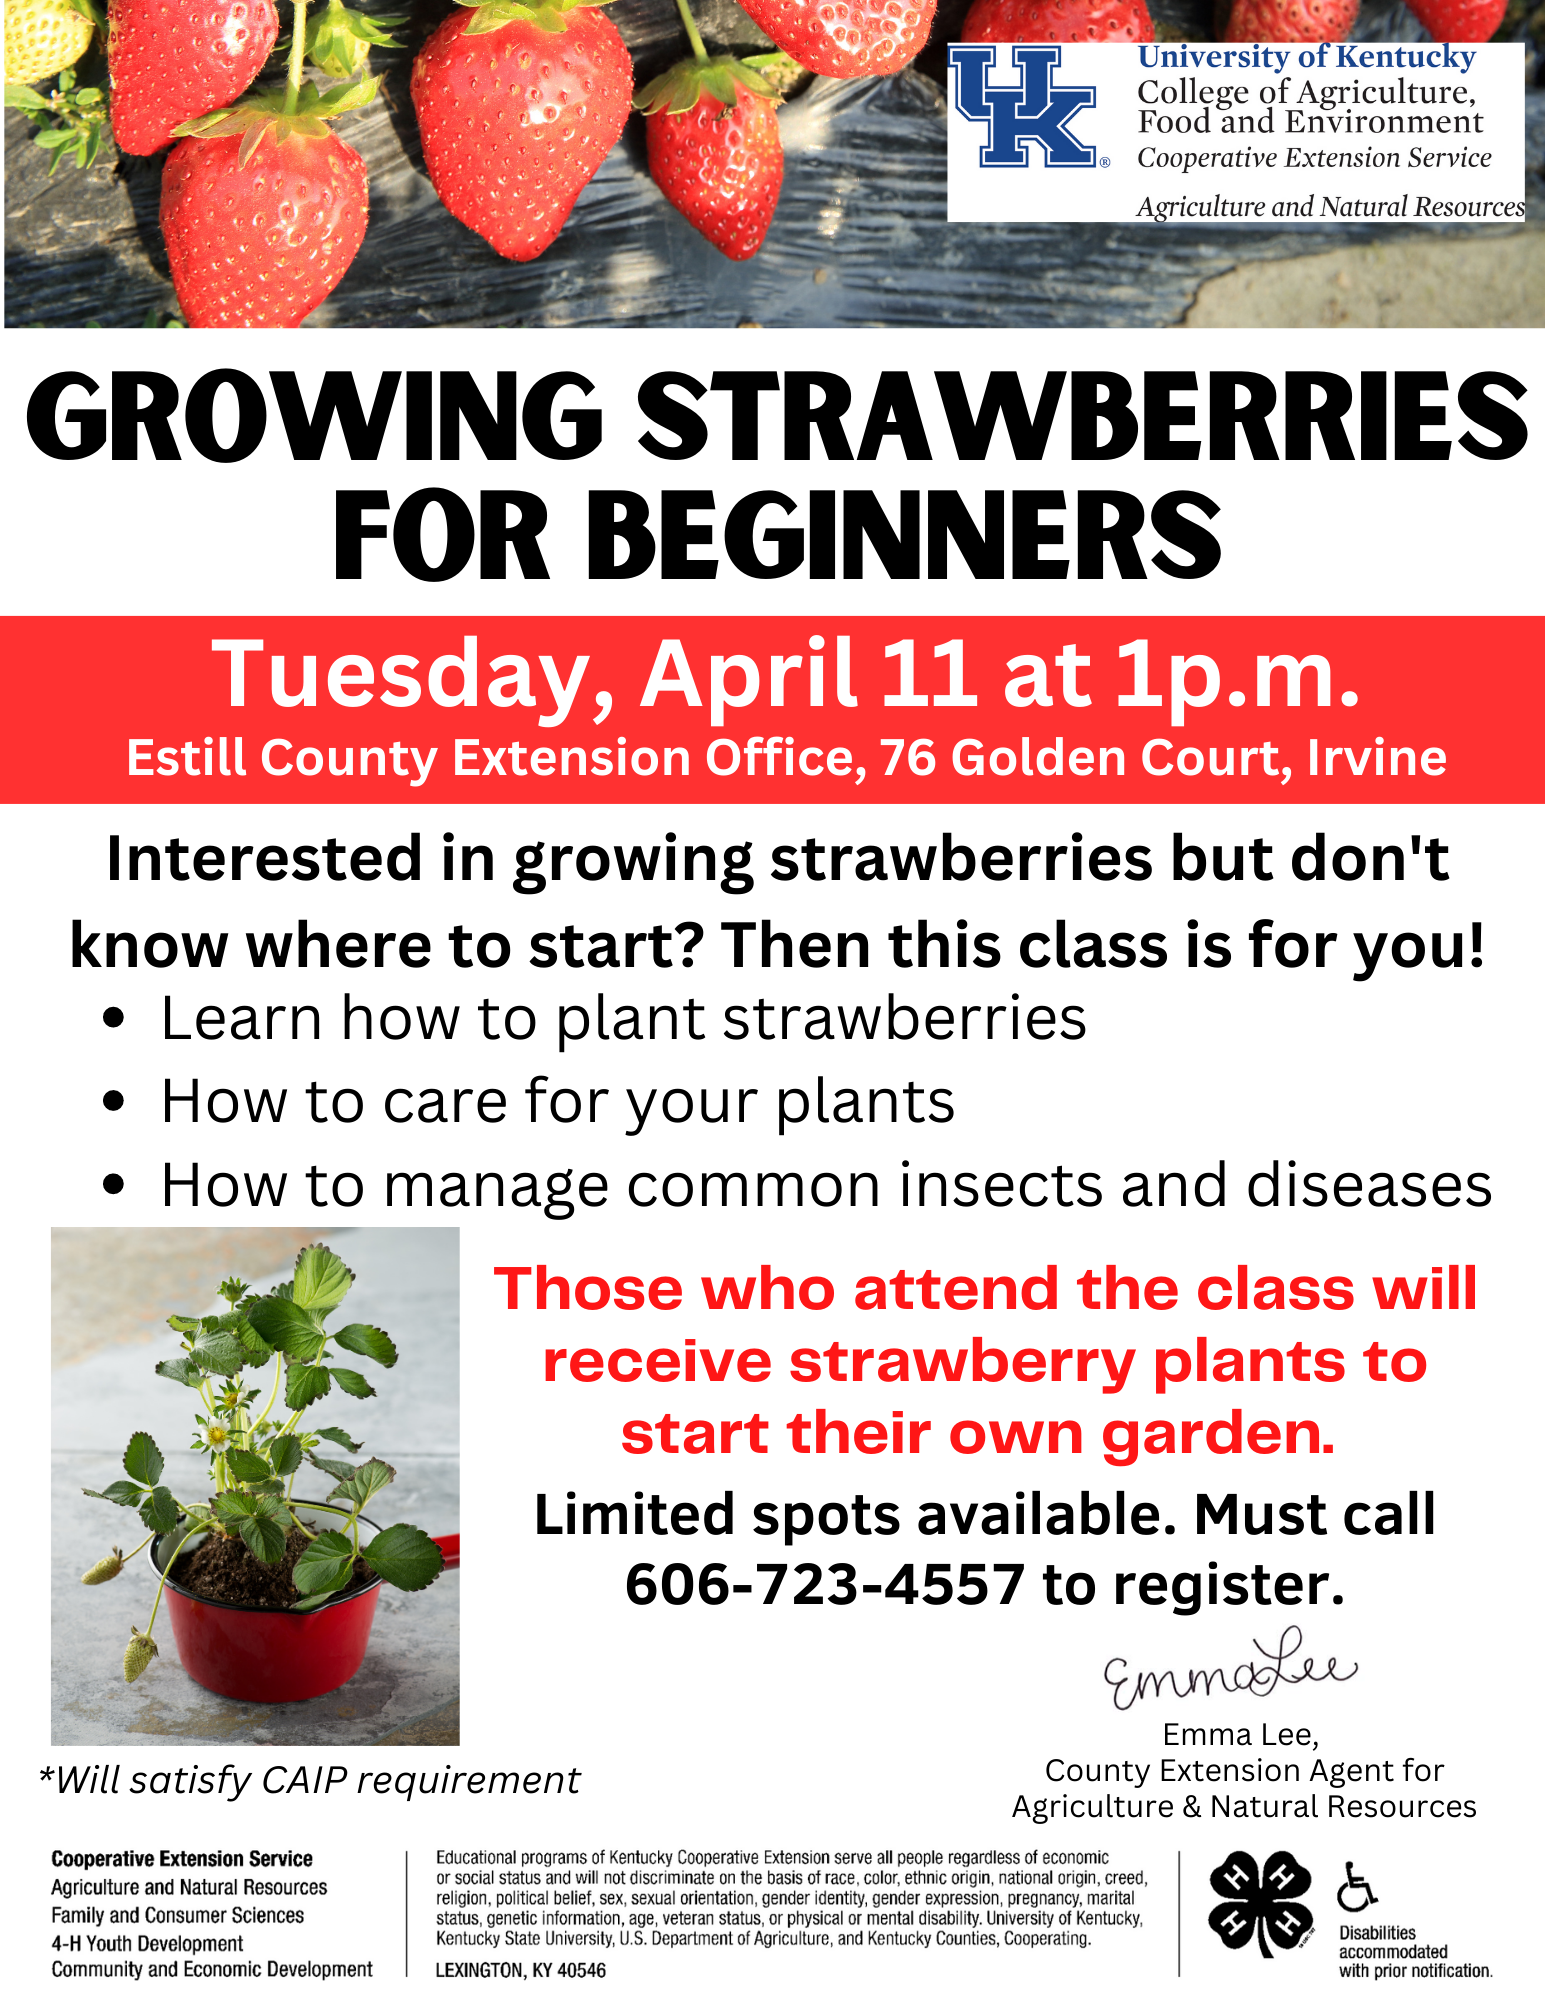 Growing Strawberries for Beginners Class Tuesday, April 11 at 1p.m. at the Estill County Extension Office